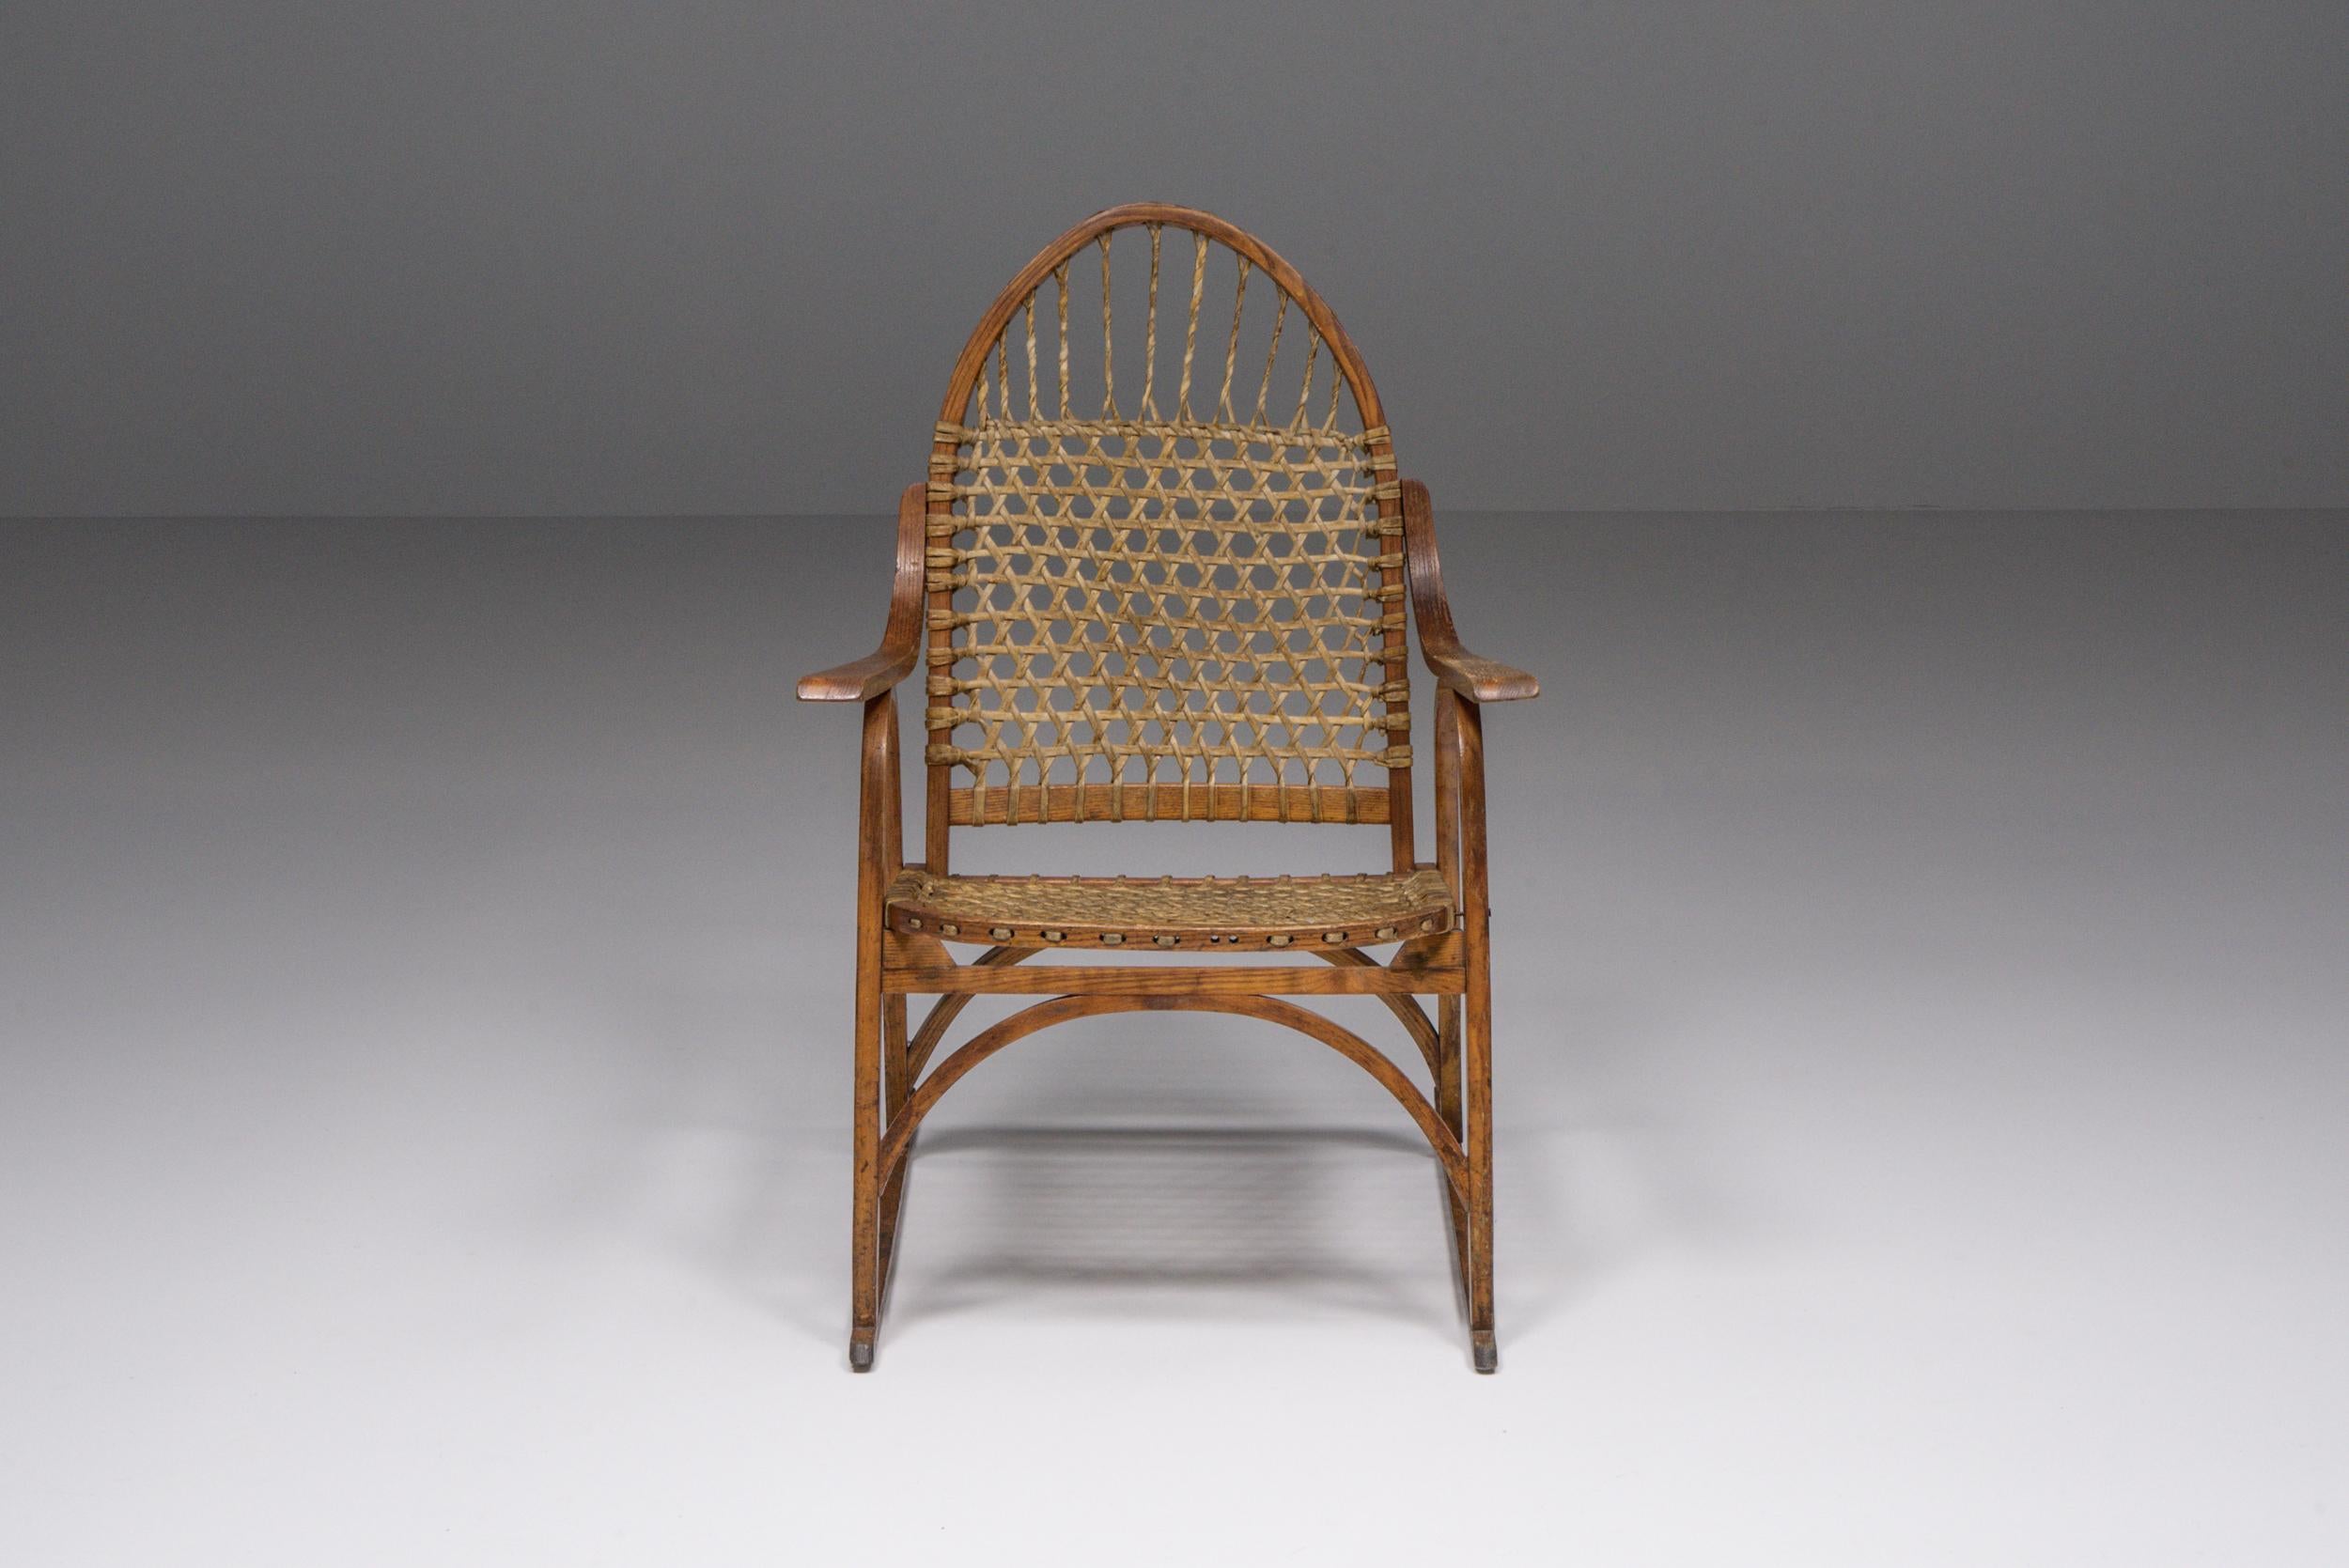 Axel Vervoordt Style; Rattan; Wicker; Mid-Century Modern; France; Craftsman's touch; Organic furniture; 

Wooden chair made of an organic frame with rattan wicker seating and backrest. A craftsman piece, that offers great detail and technique.